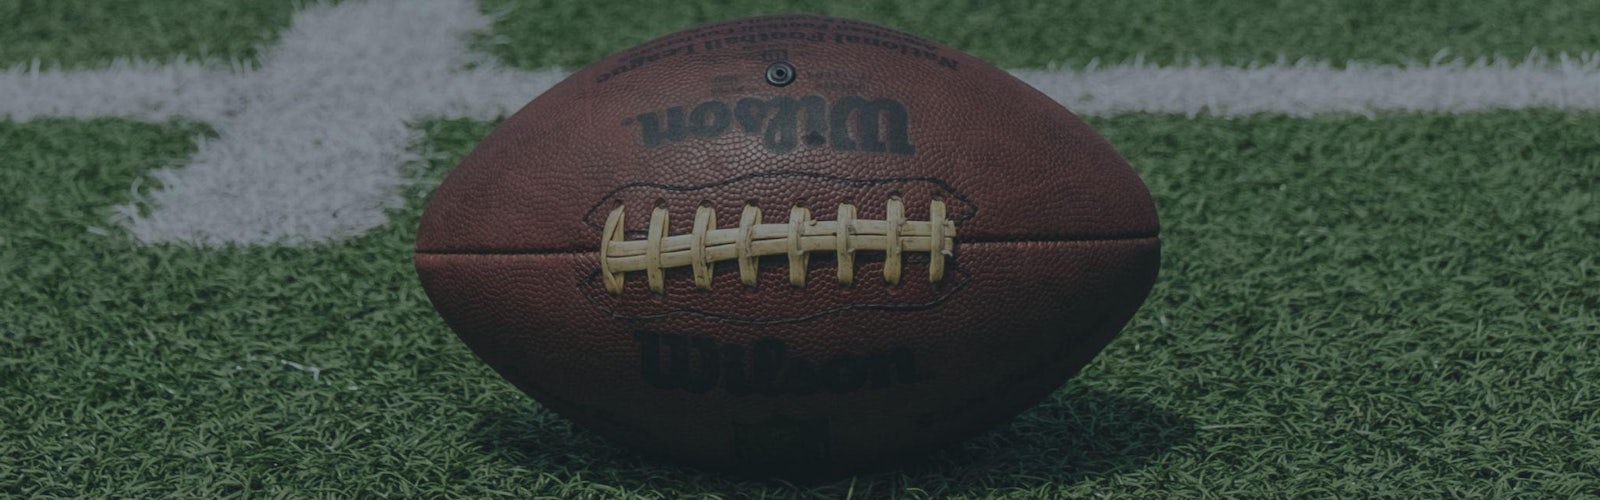 NFL betting sites header image showing Wilson football on grass